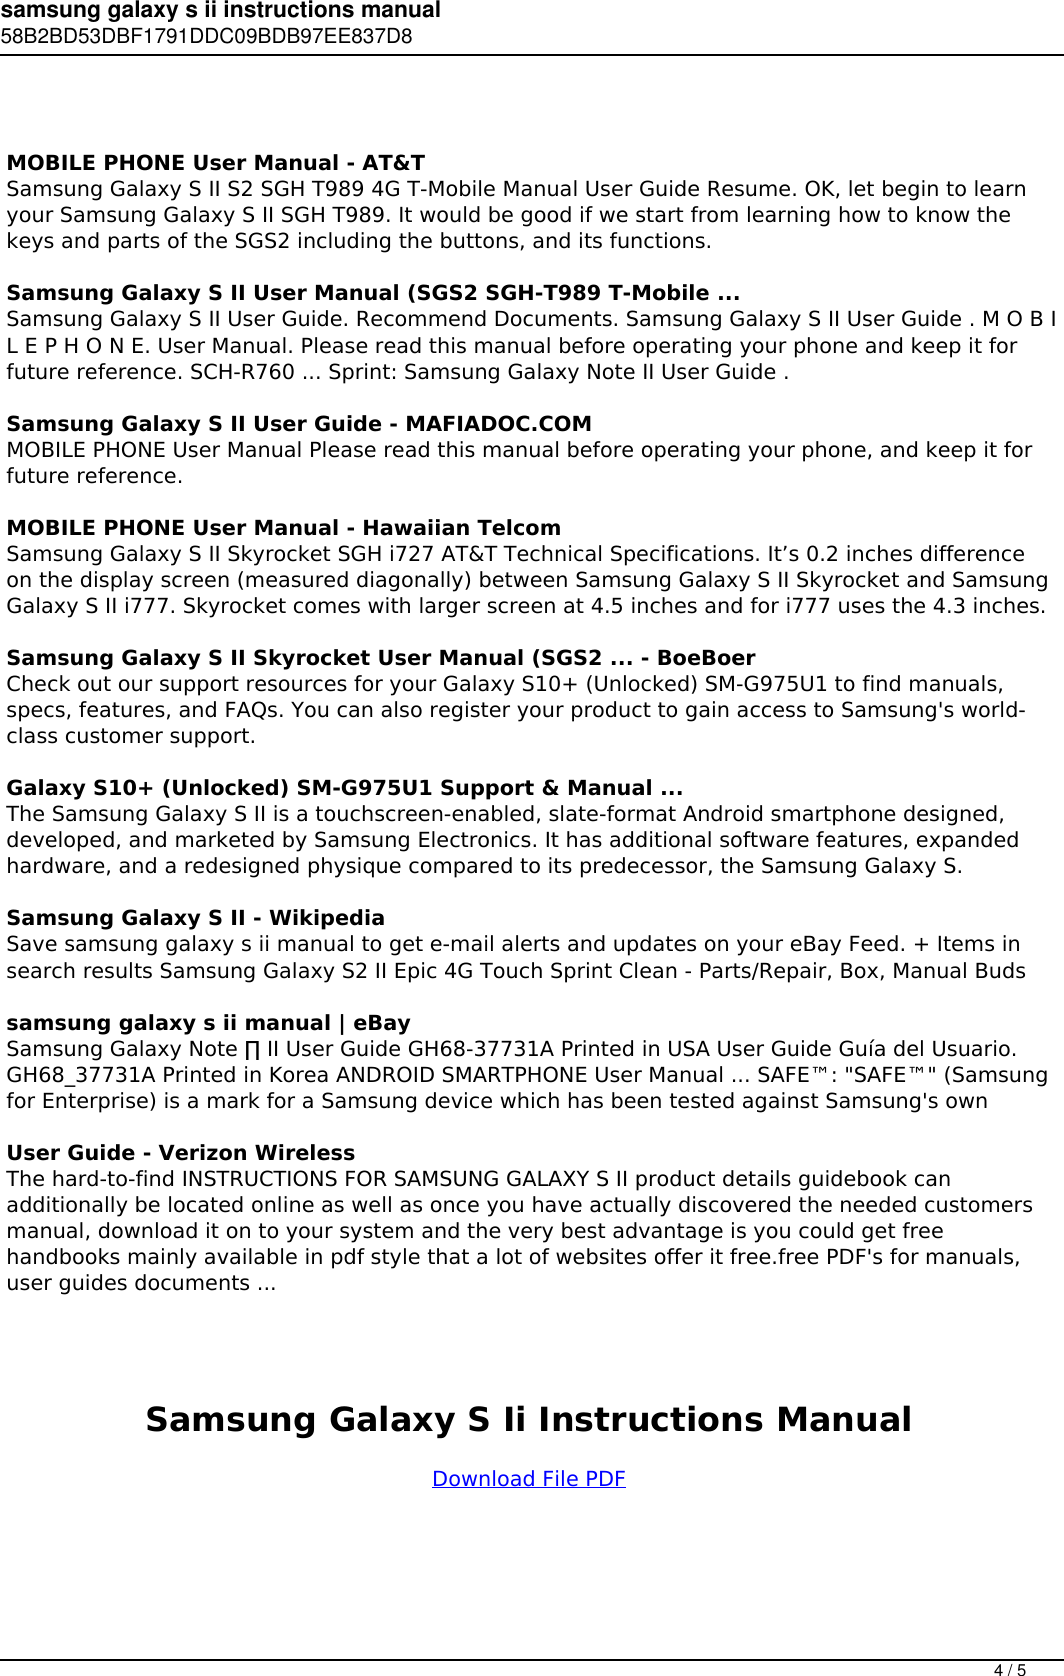 Page 4 of 5 - Samsung Galaxy S Ii Instructions Manual